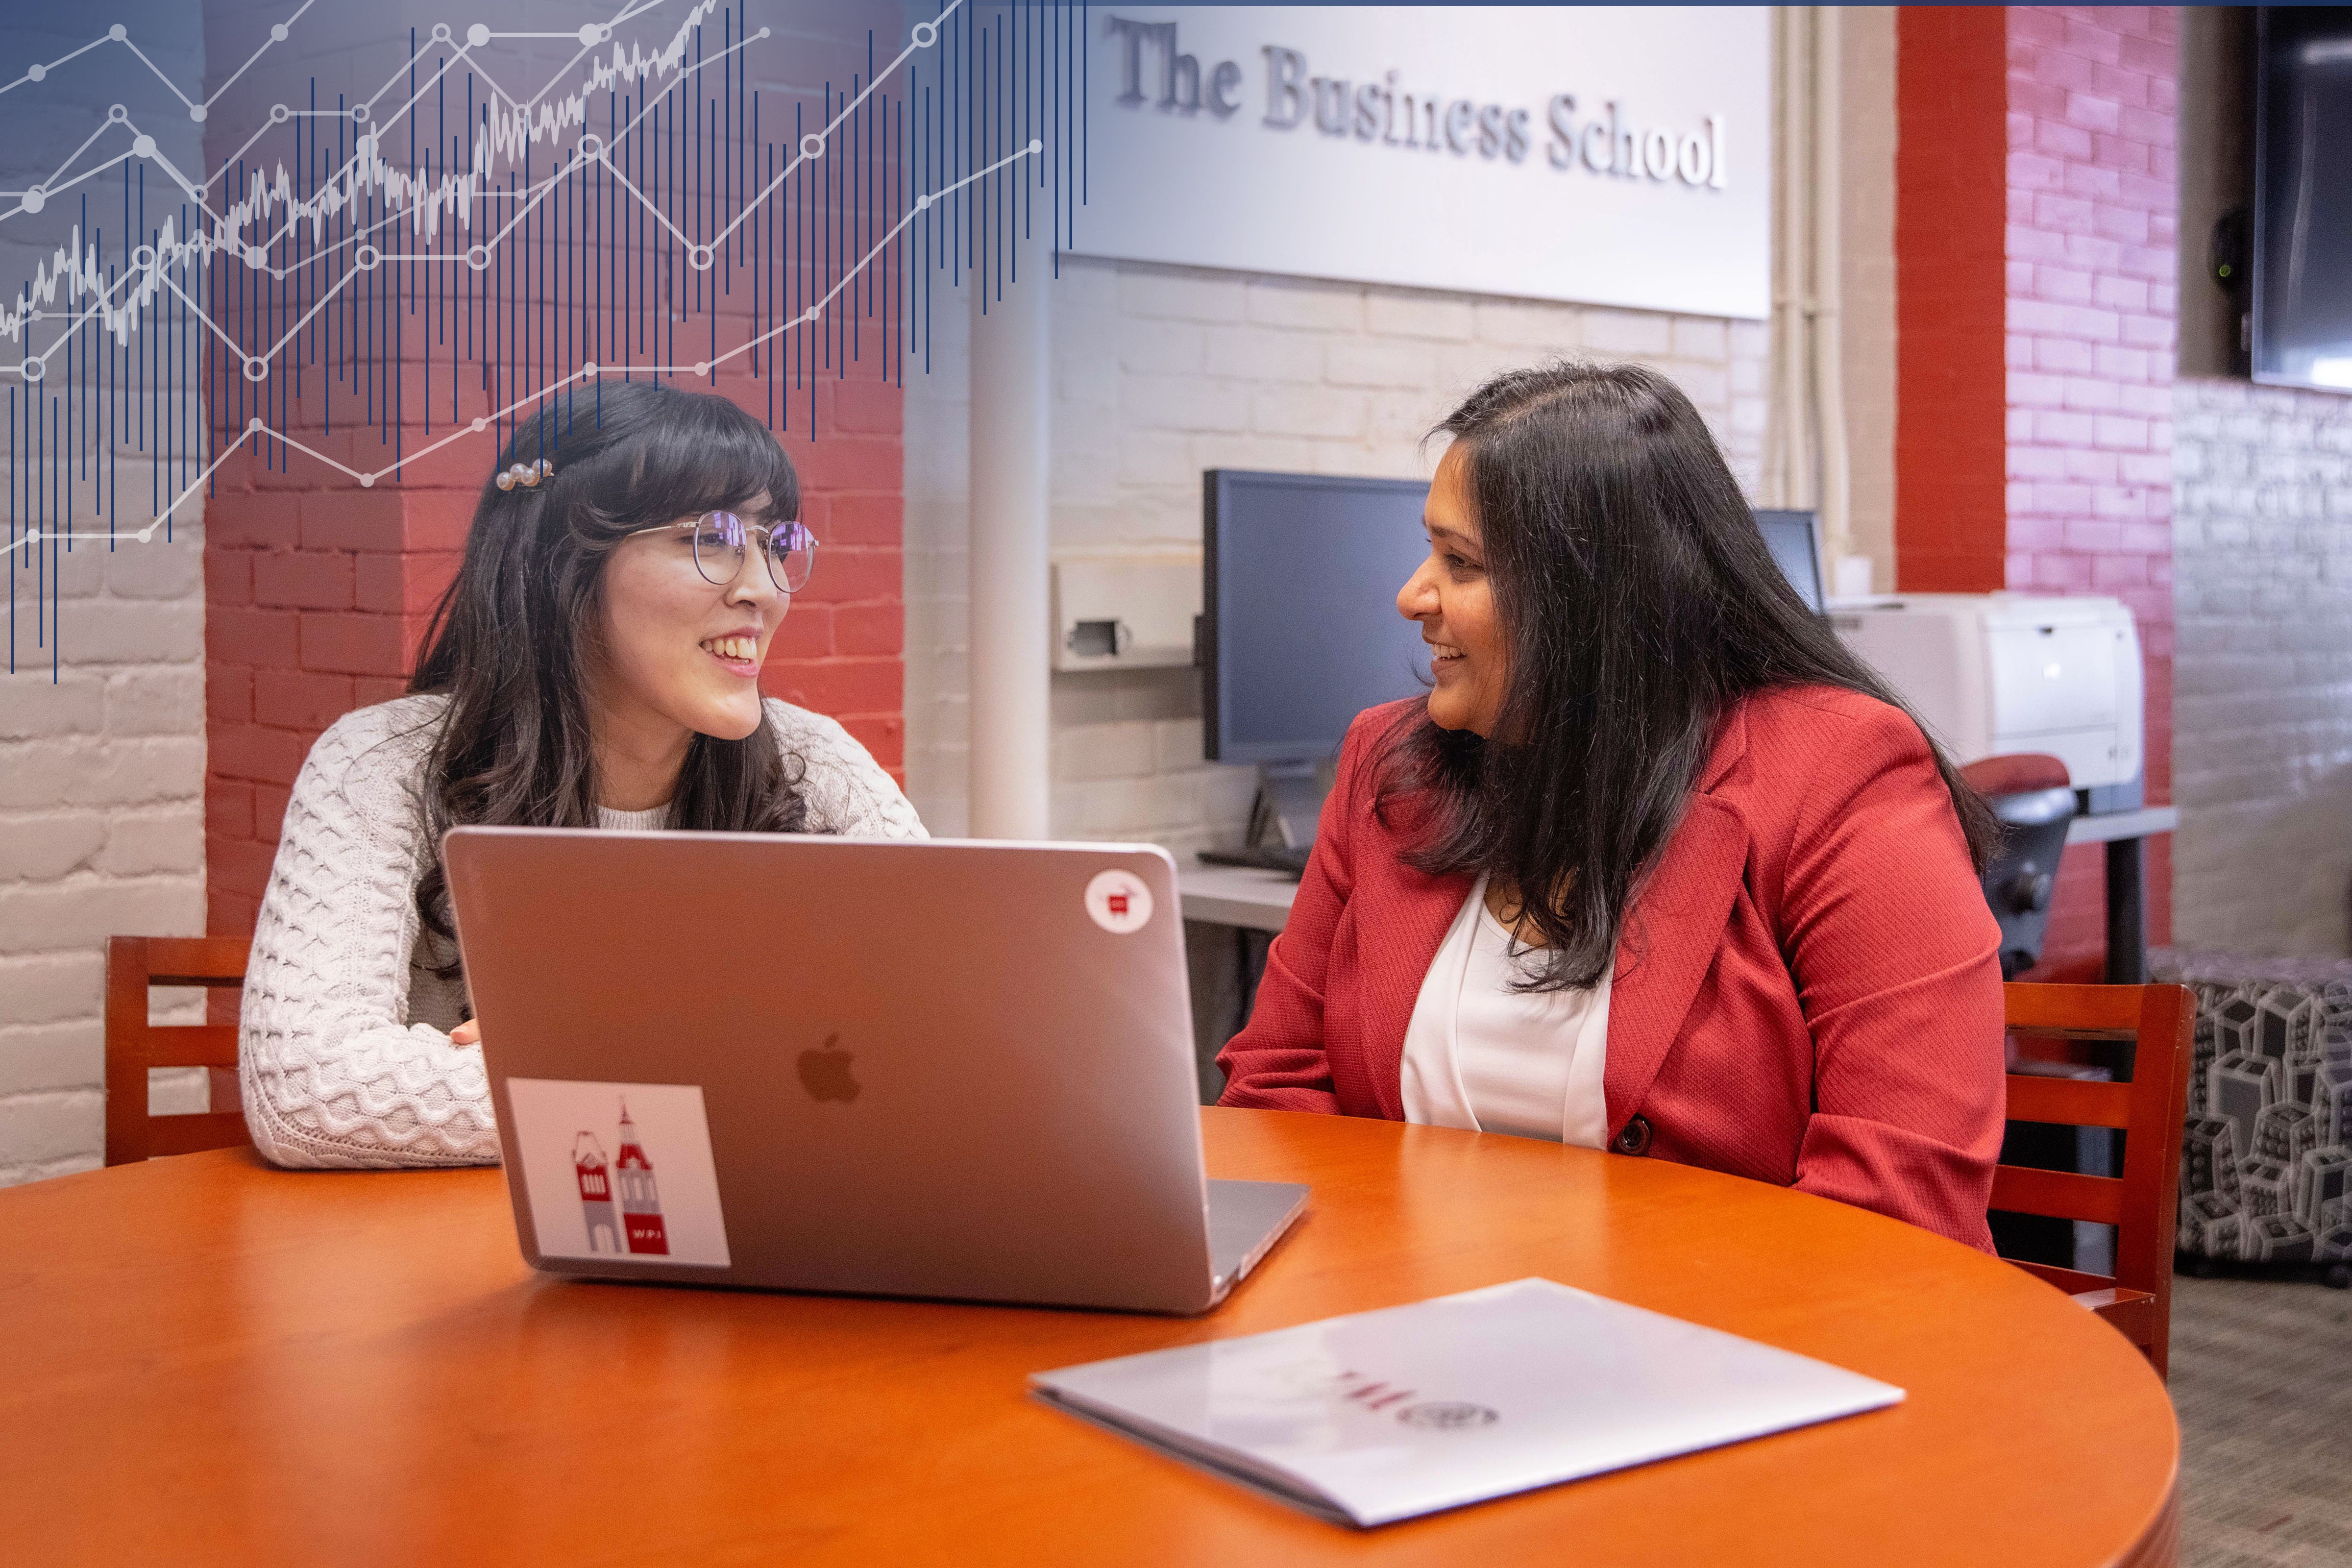 WPI Becomes First University in U.S. to Offer Financial Technology PhD Program, Exclusive in All Degree Levels in FinTech